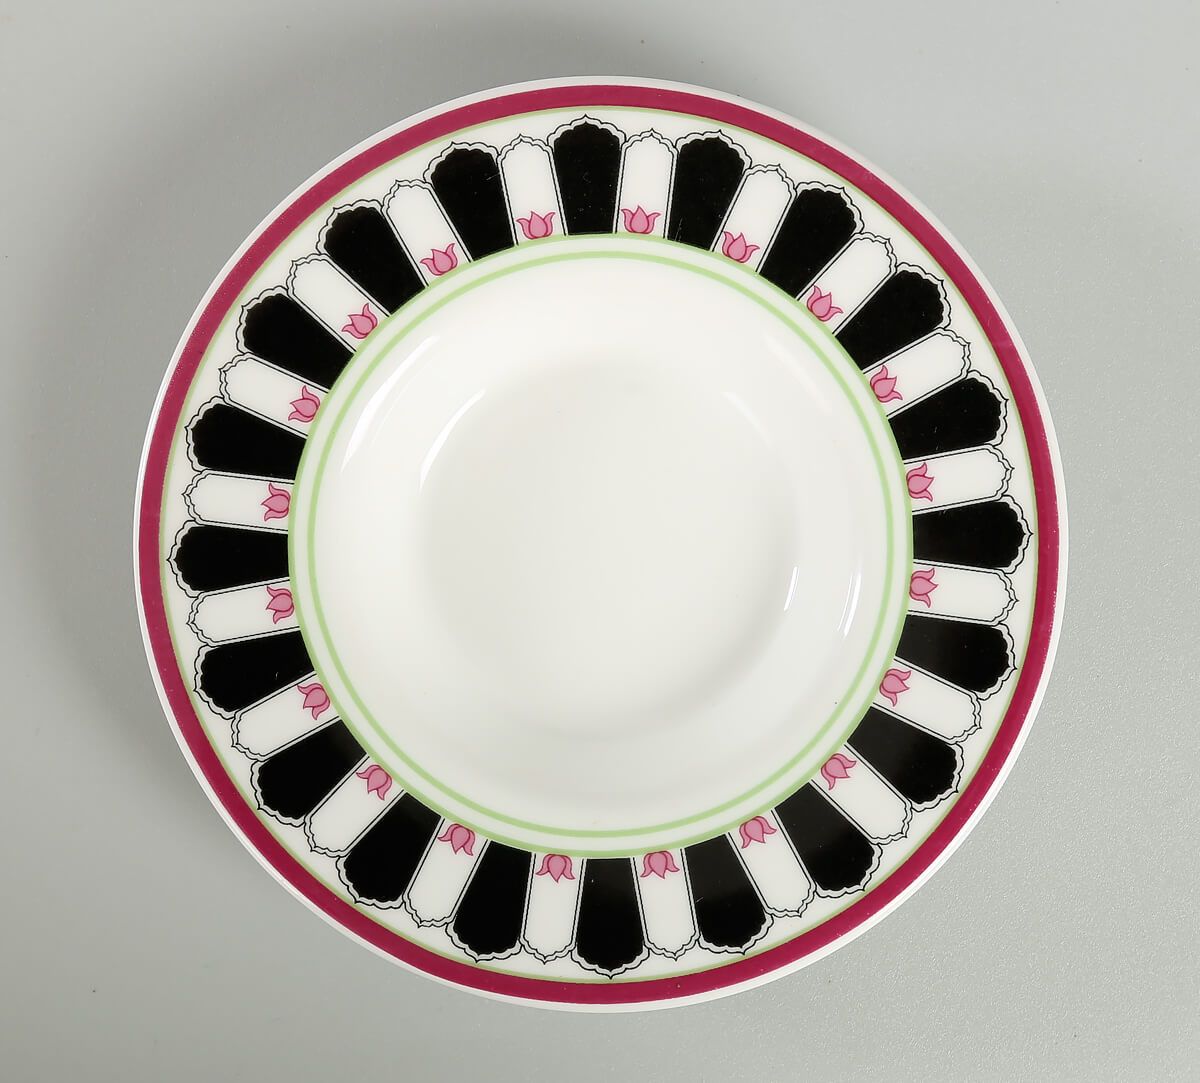 India Circus Appliqued Harmony Cup and Saucer (Set of 6)